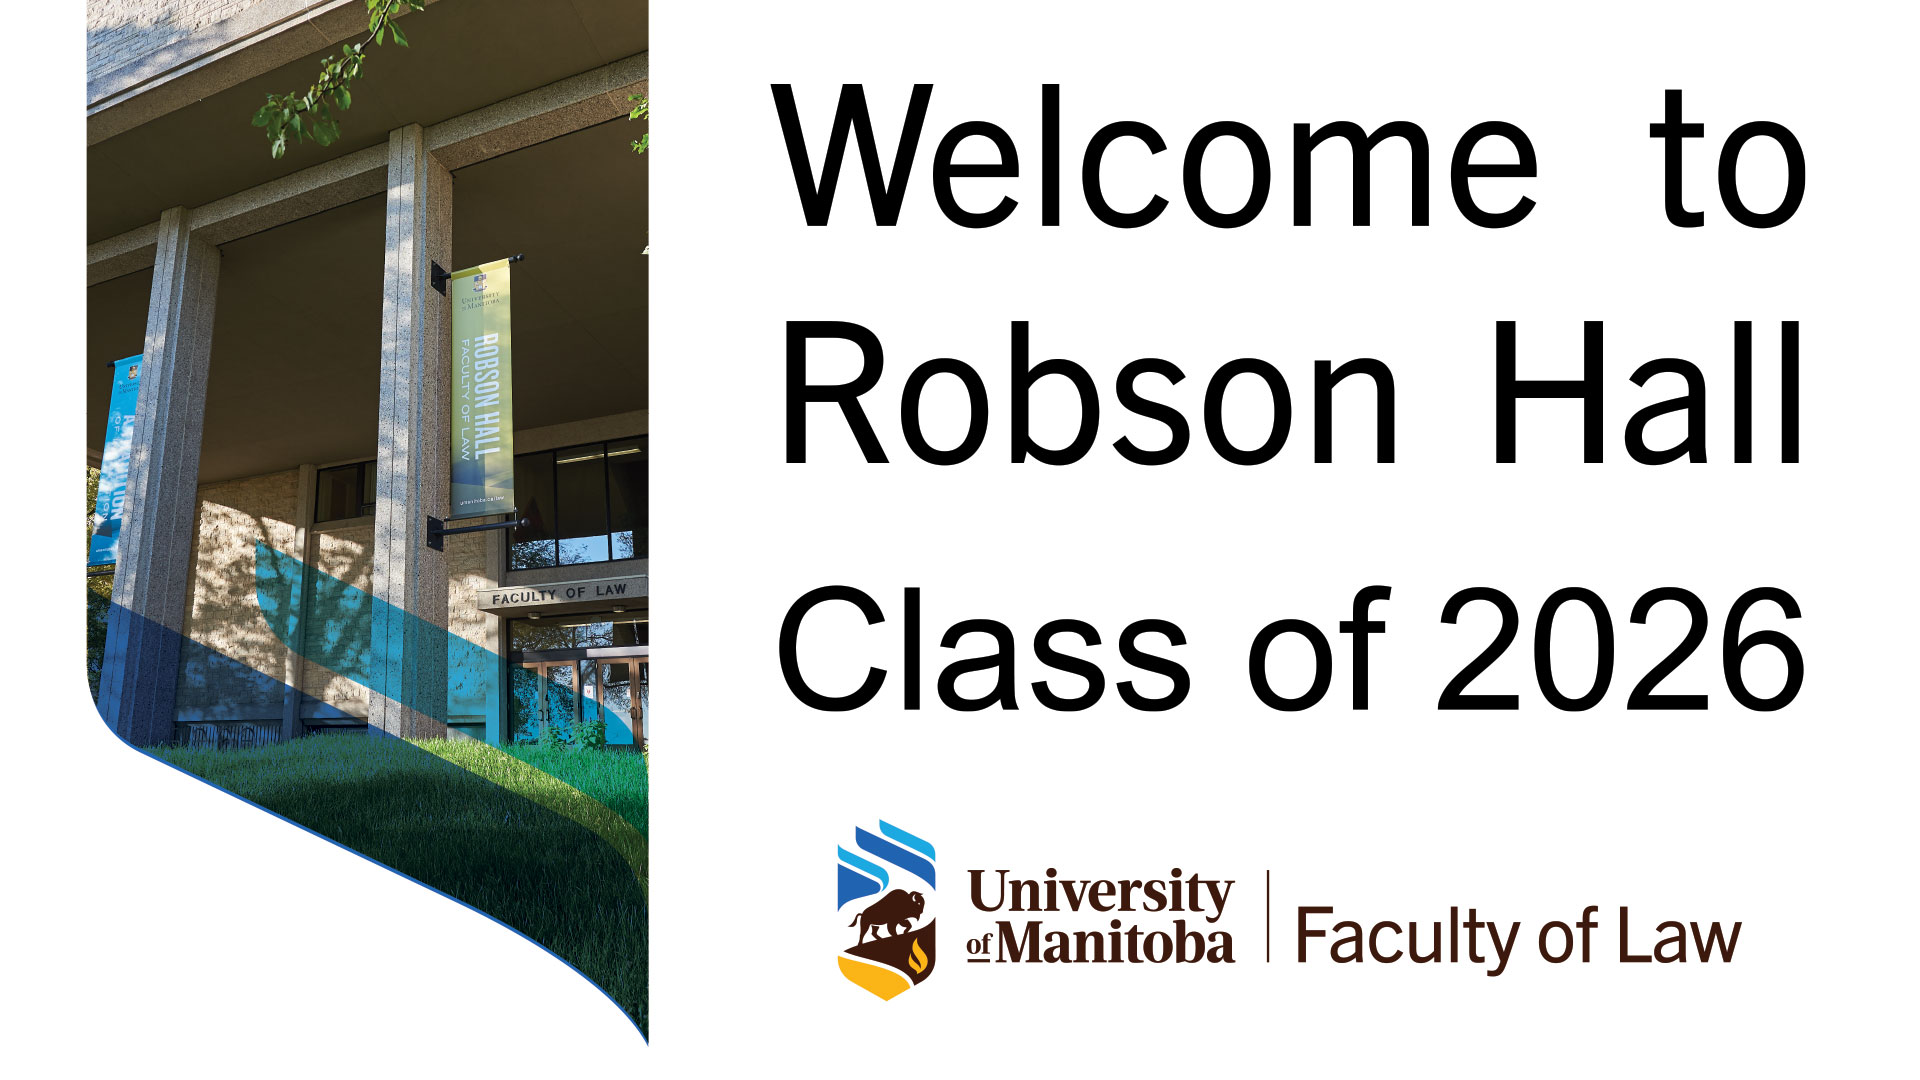 Welcome to Robson Hall class of 2026!